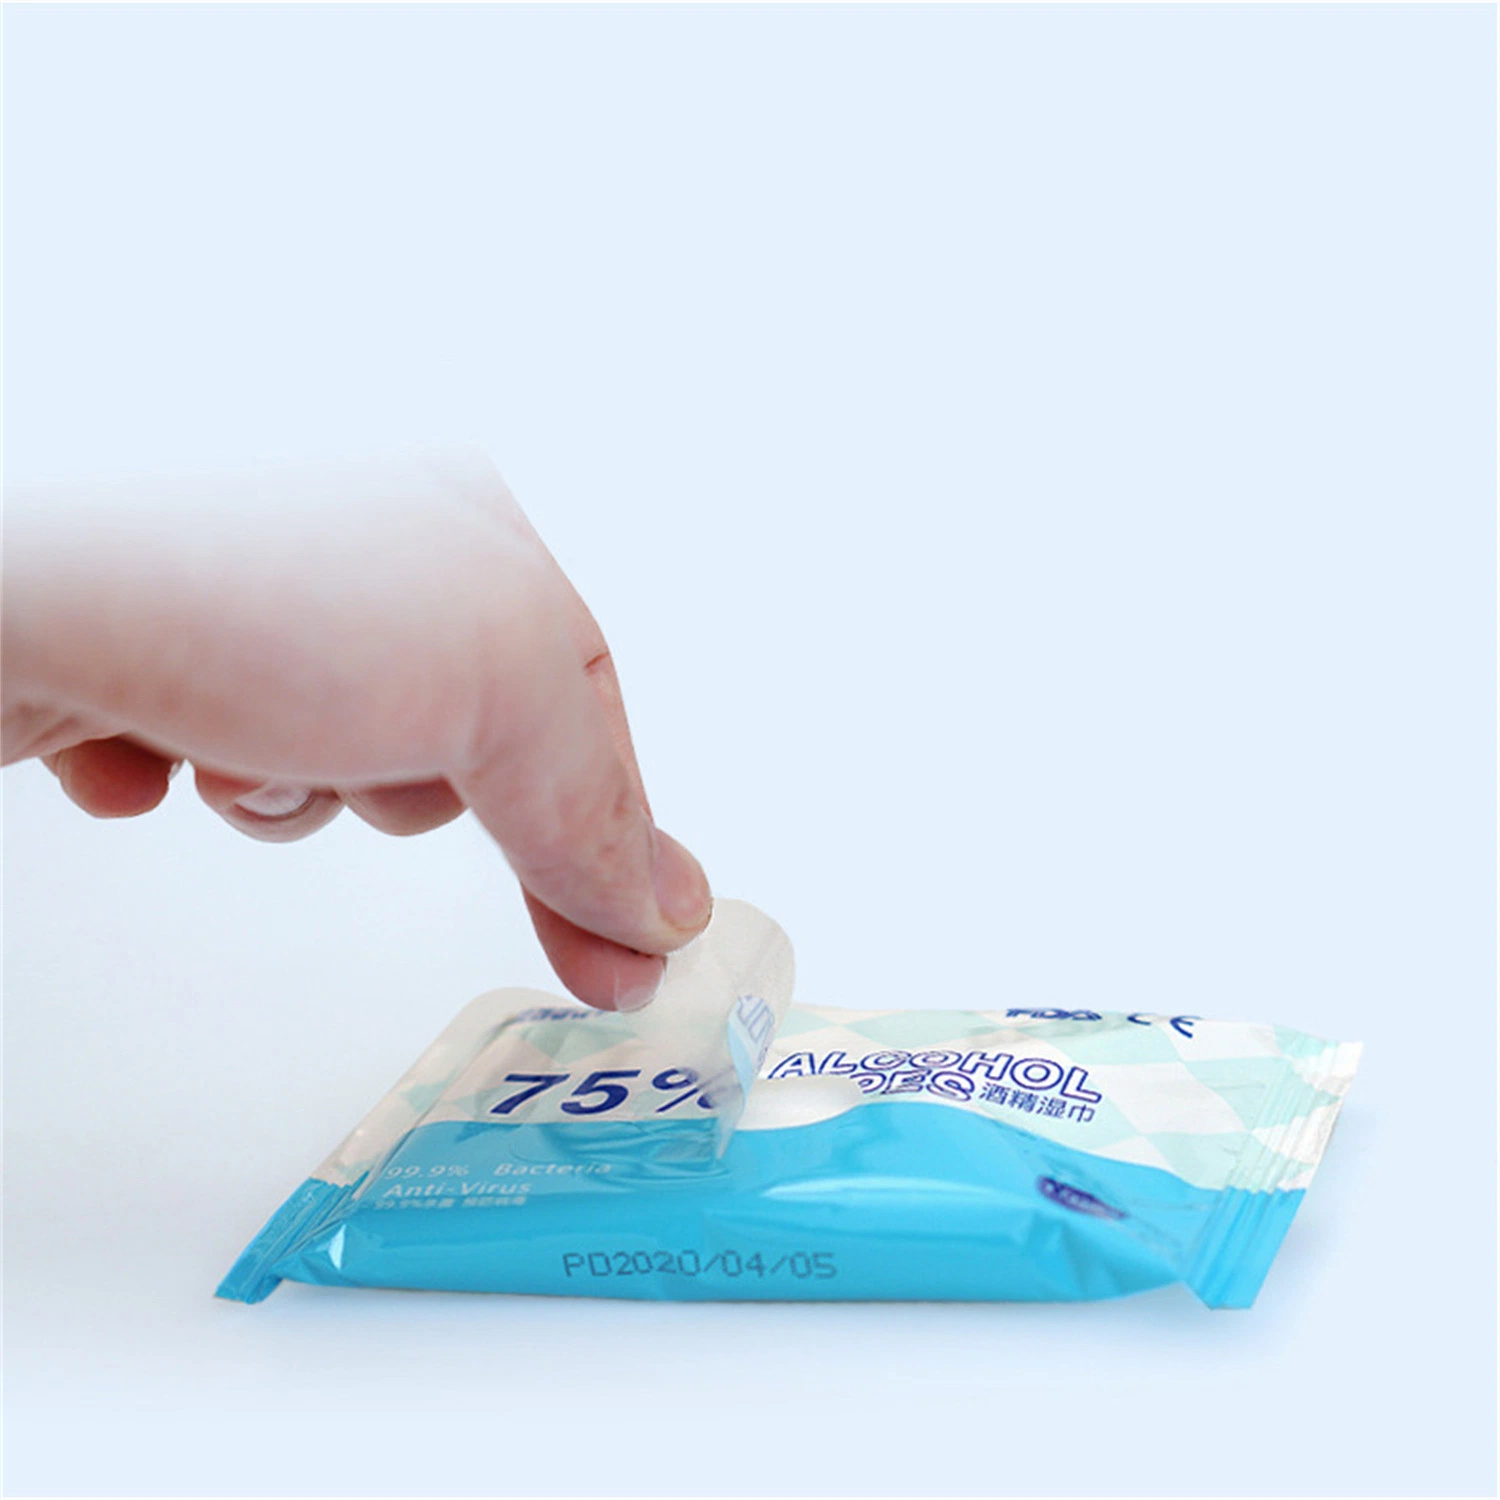 China Manufacturer Custom Logo Sterilization 75% Alcohol Wet Wipes Medical and Family Adult Baby Cleaning Wet Wipe